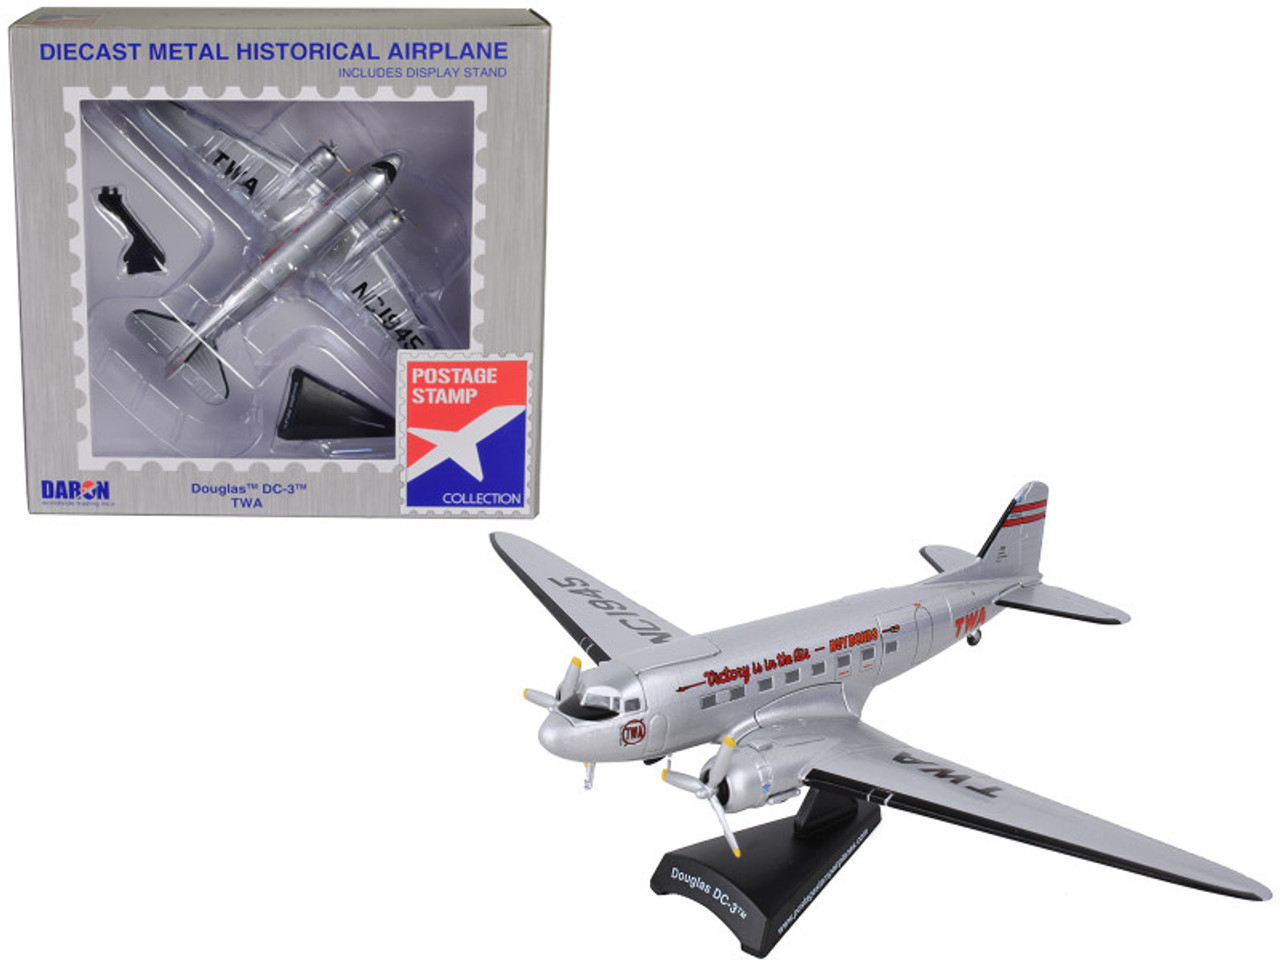 Douglas DC-3 Passenger Aircraft Trans World Airlines - Victory is in the  Air 1/144 Diecast Model Airplane by Postage Stamp 